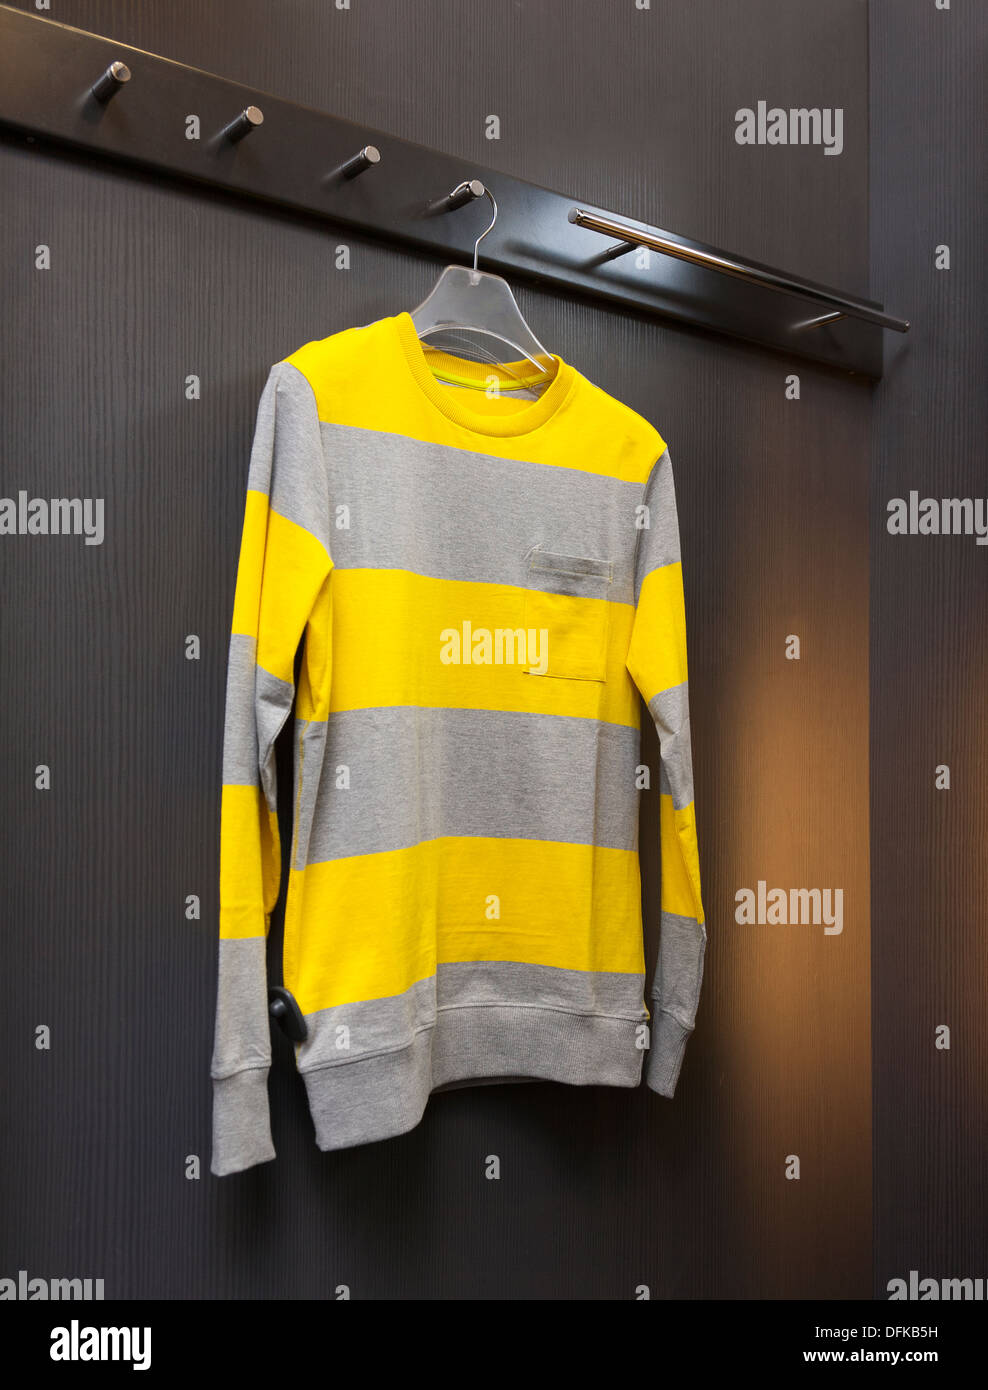 Close up of sweater, sweatshirt in retail shop dressing cabin. Changing room. Stock Photo